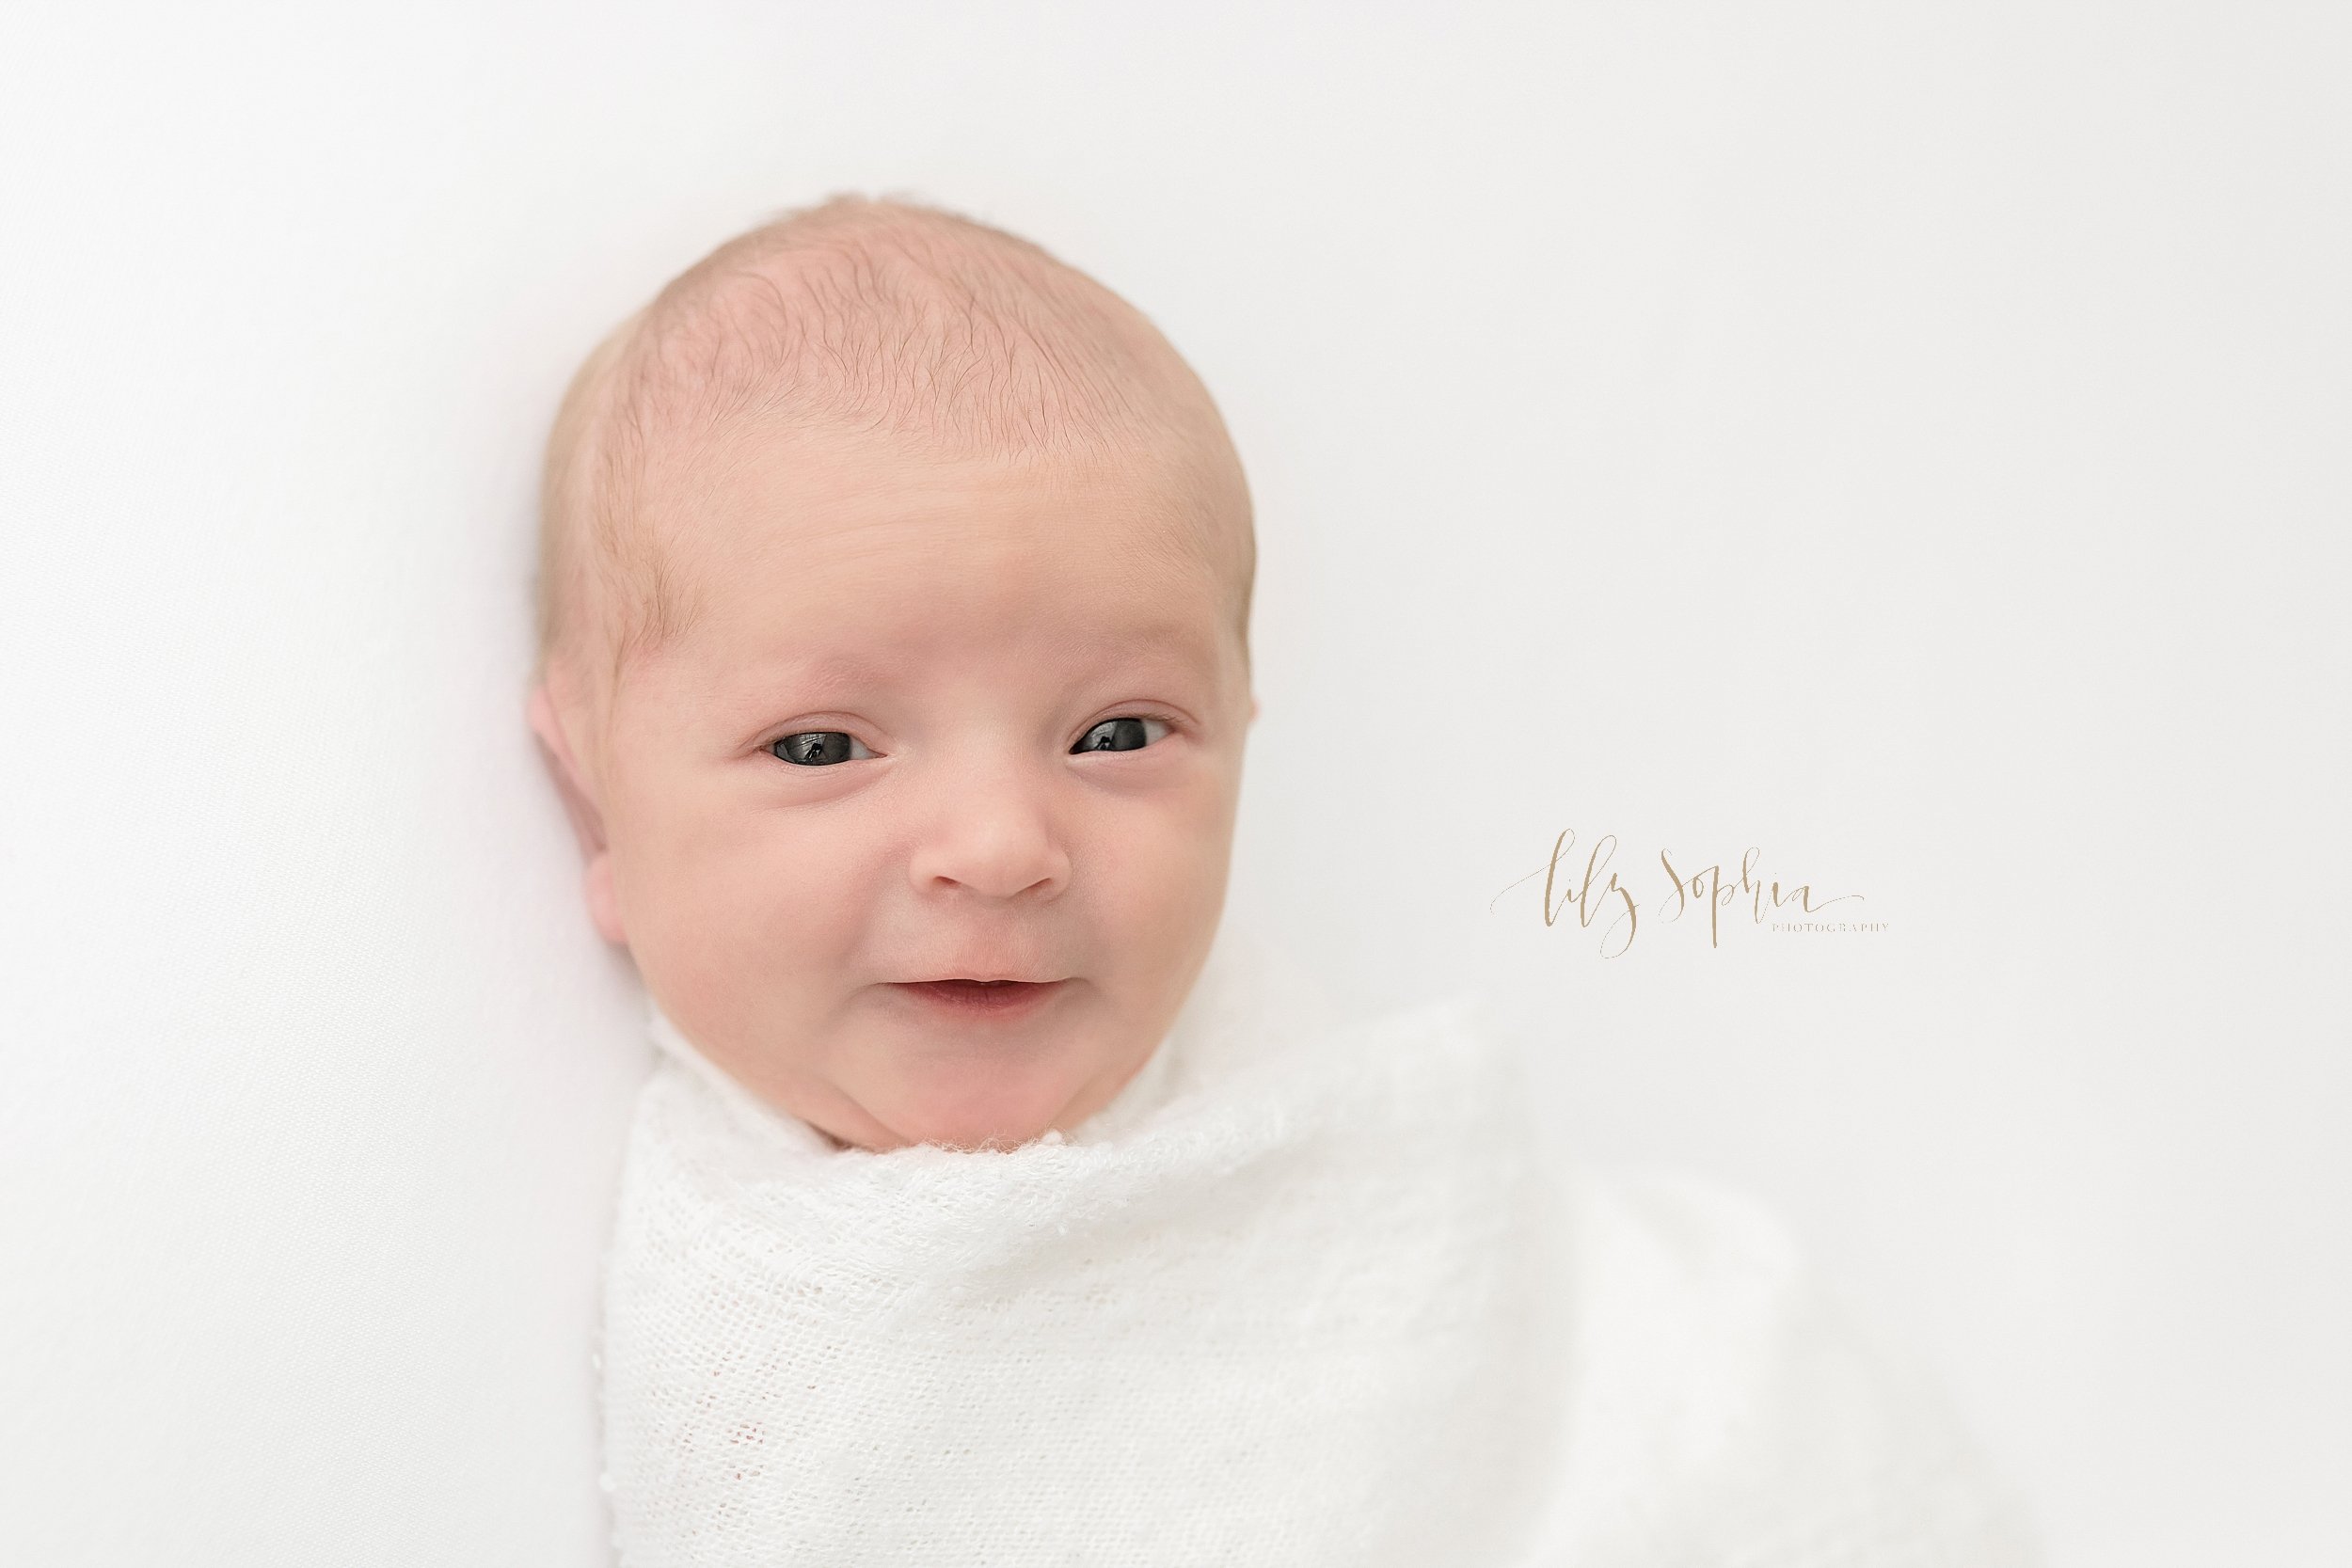  Close-up picture of an awake newborn baby boy as he smiles while being swaddled to his chin in a soft white blanket taken near Ansley Park in Atlanta using natural light. 